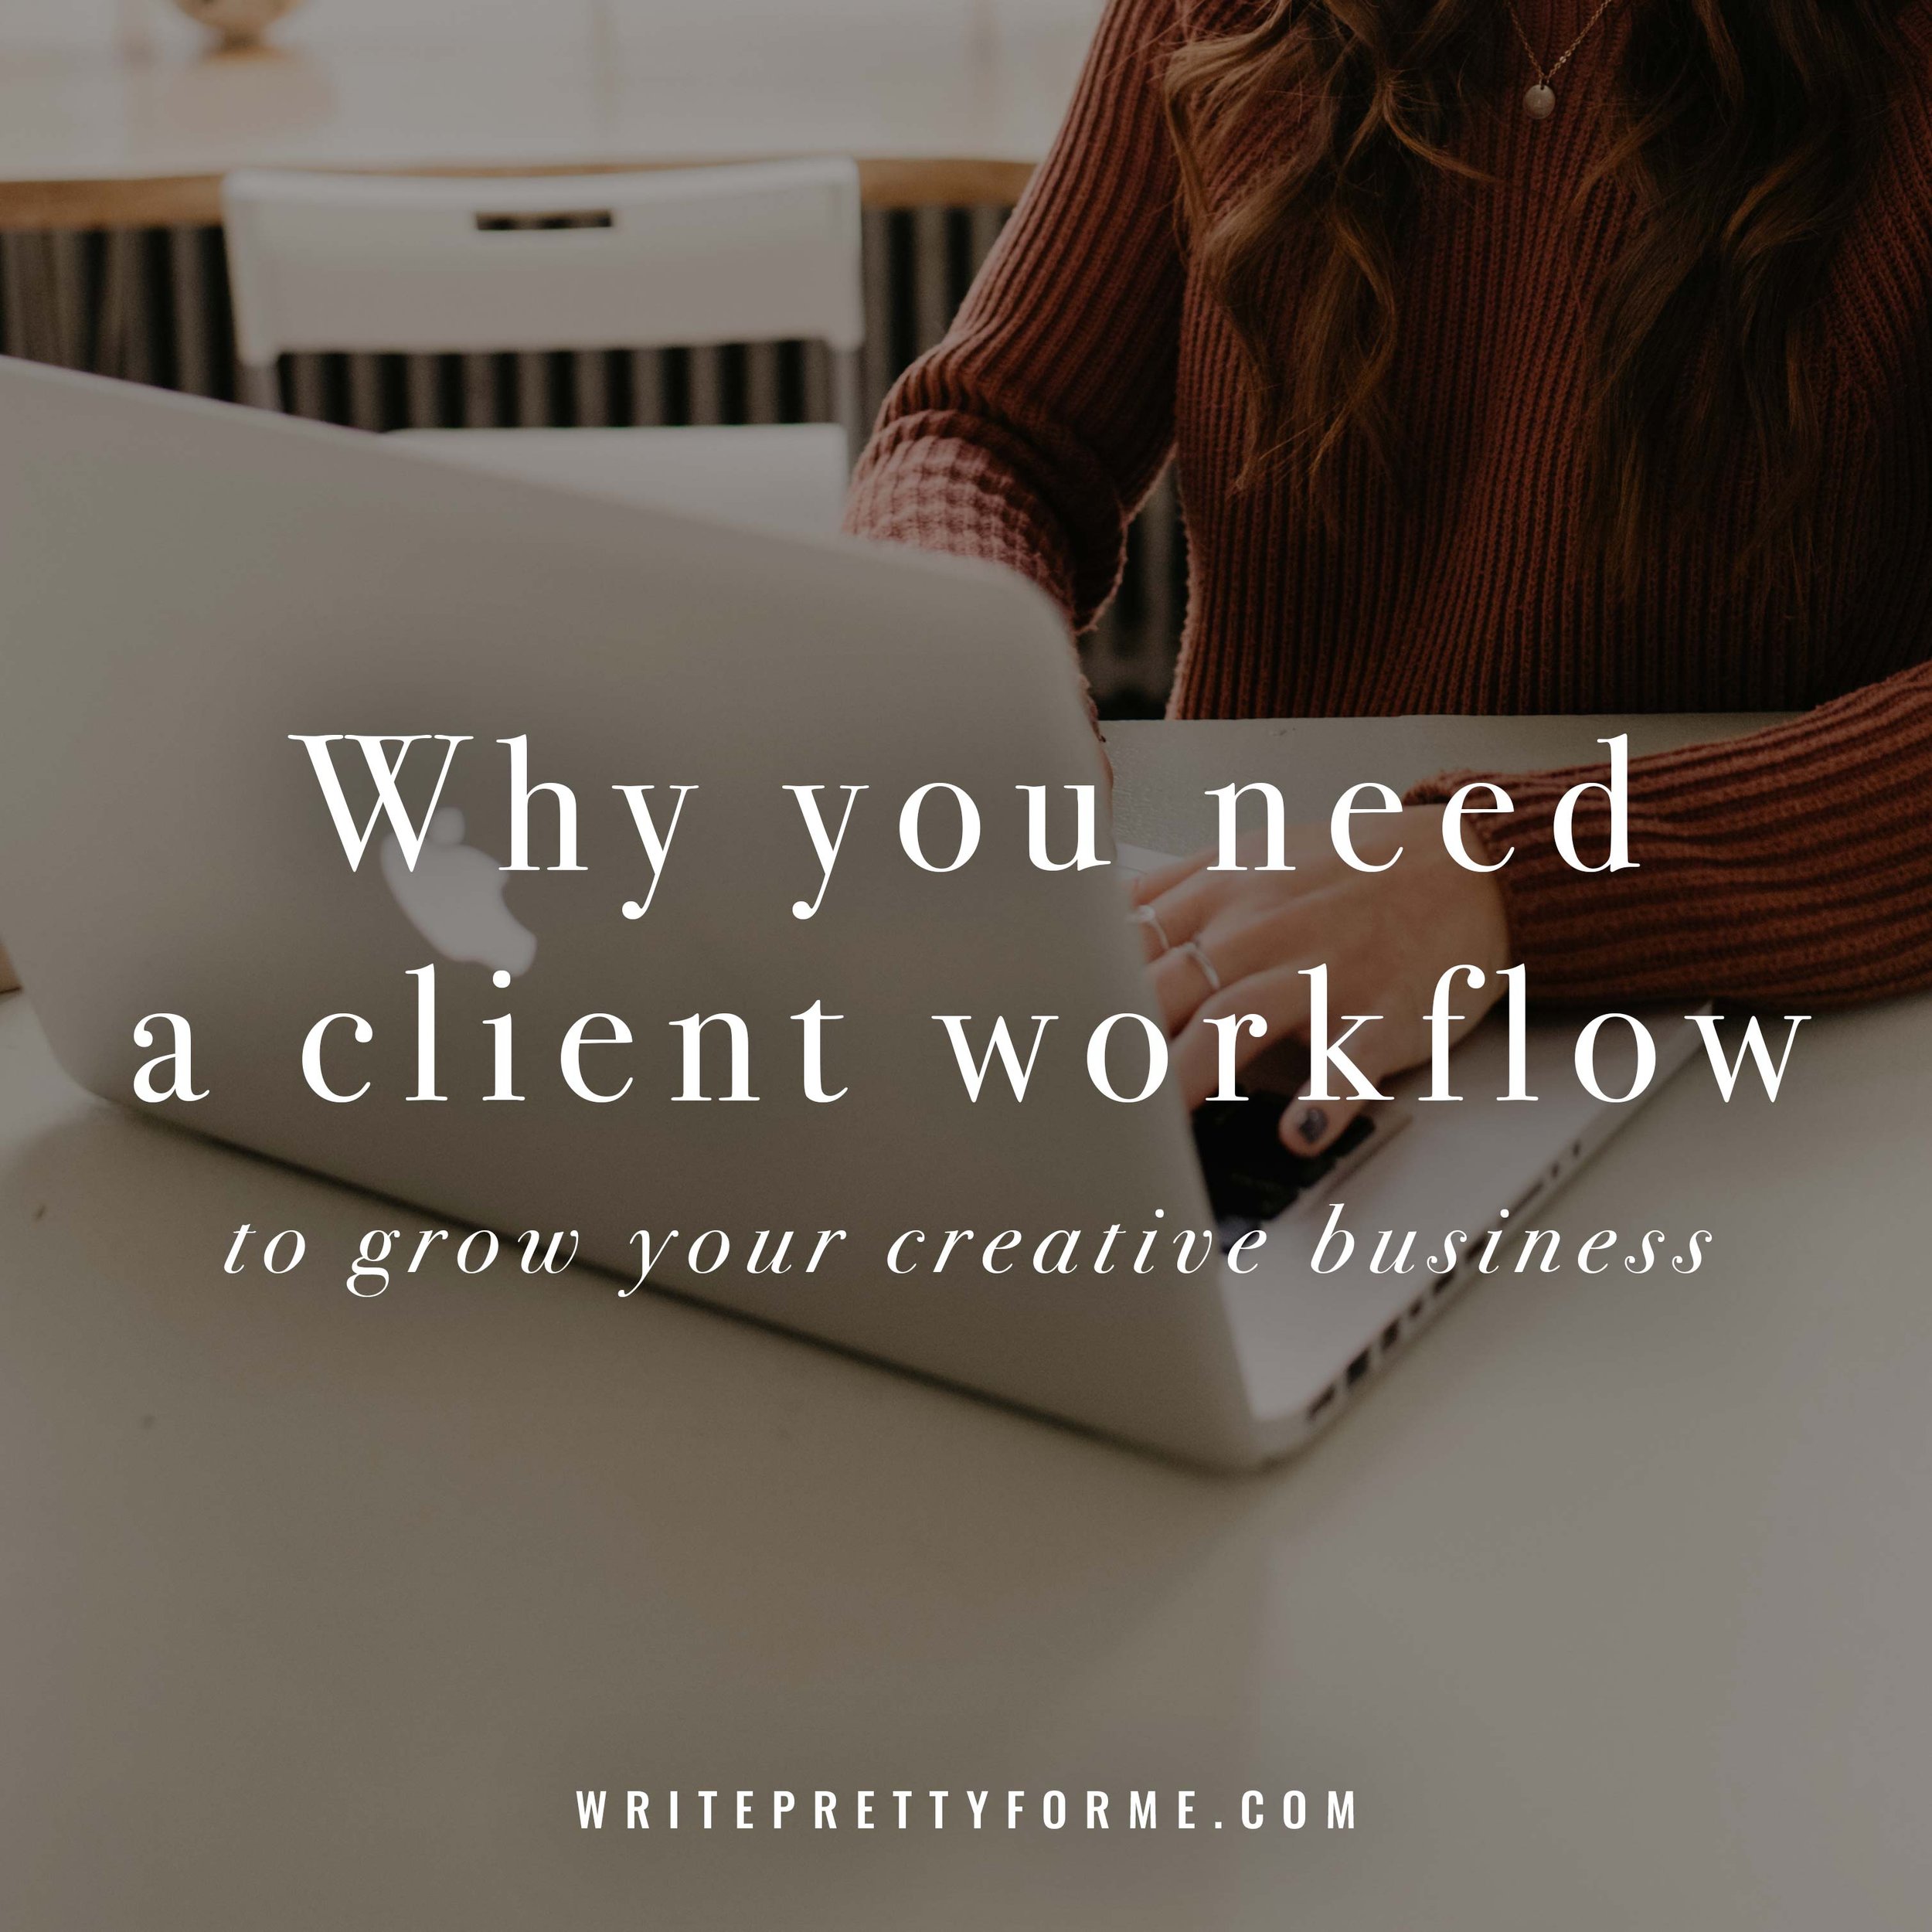 Why You Need a Client Workflow to Grow Your Creative Business